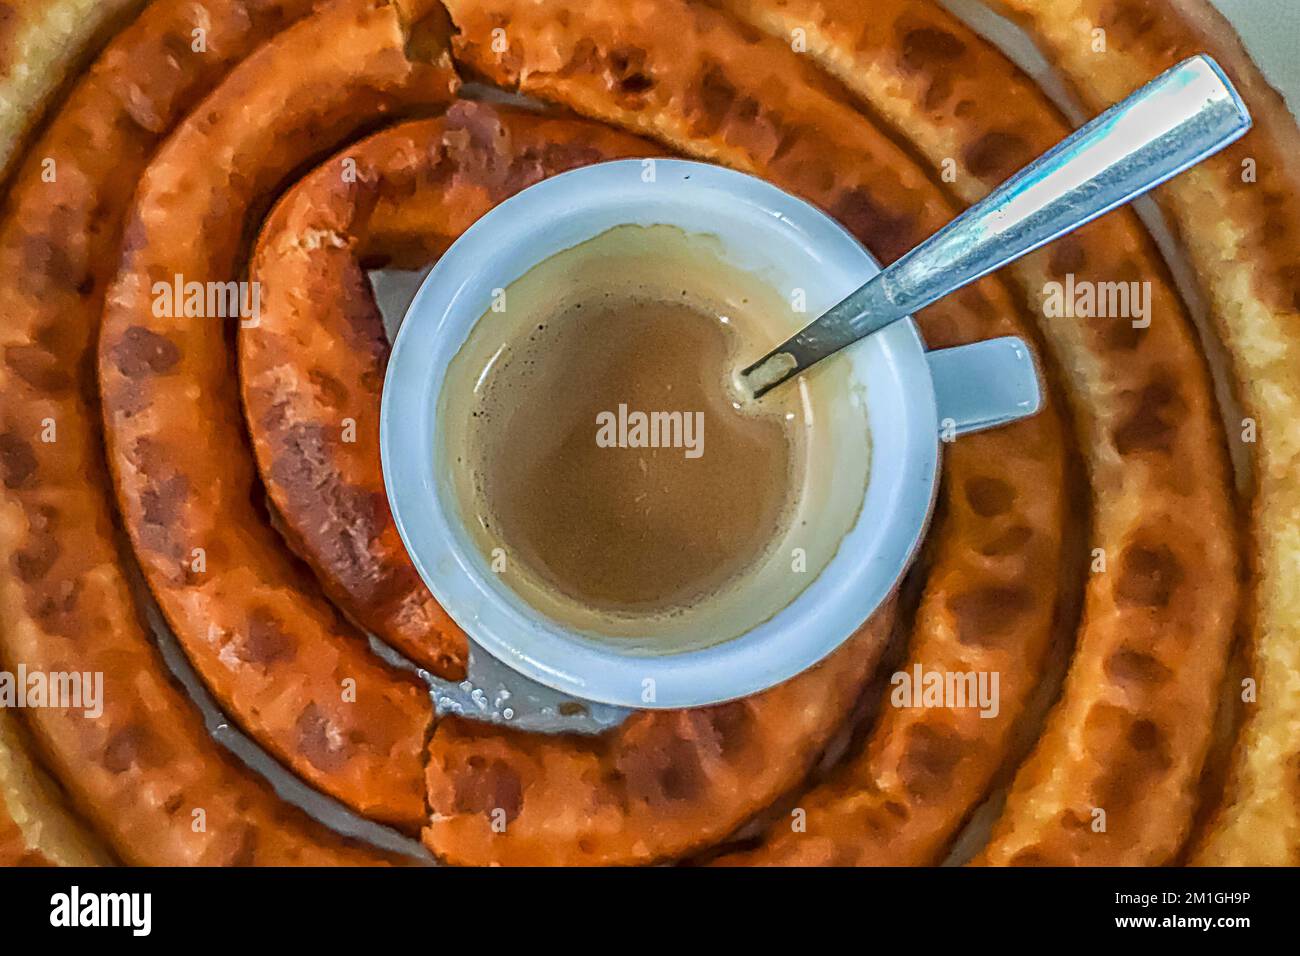 Coffee cut with milk, in the center of a portion of churros Stock Photo